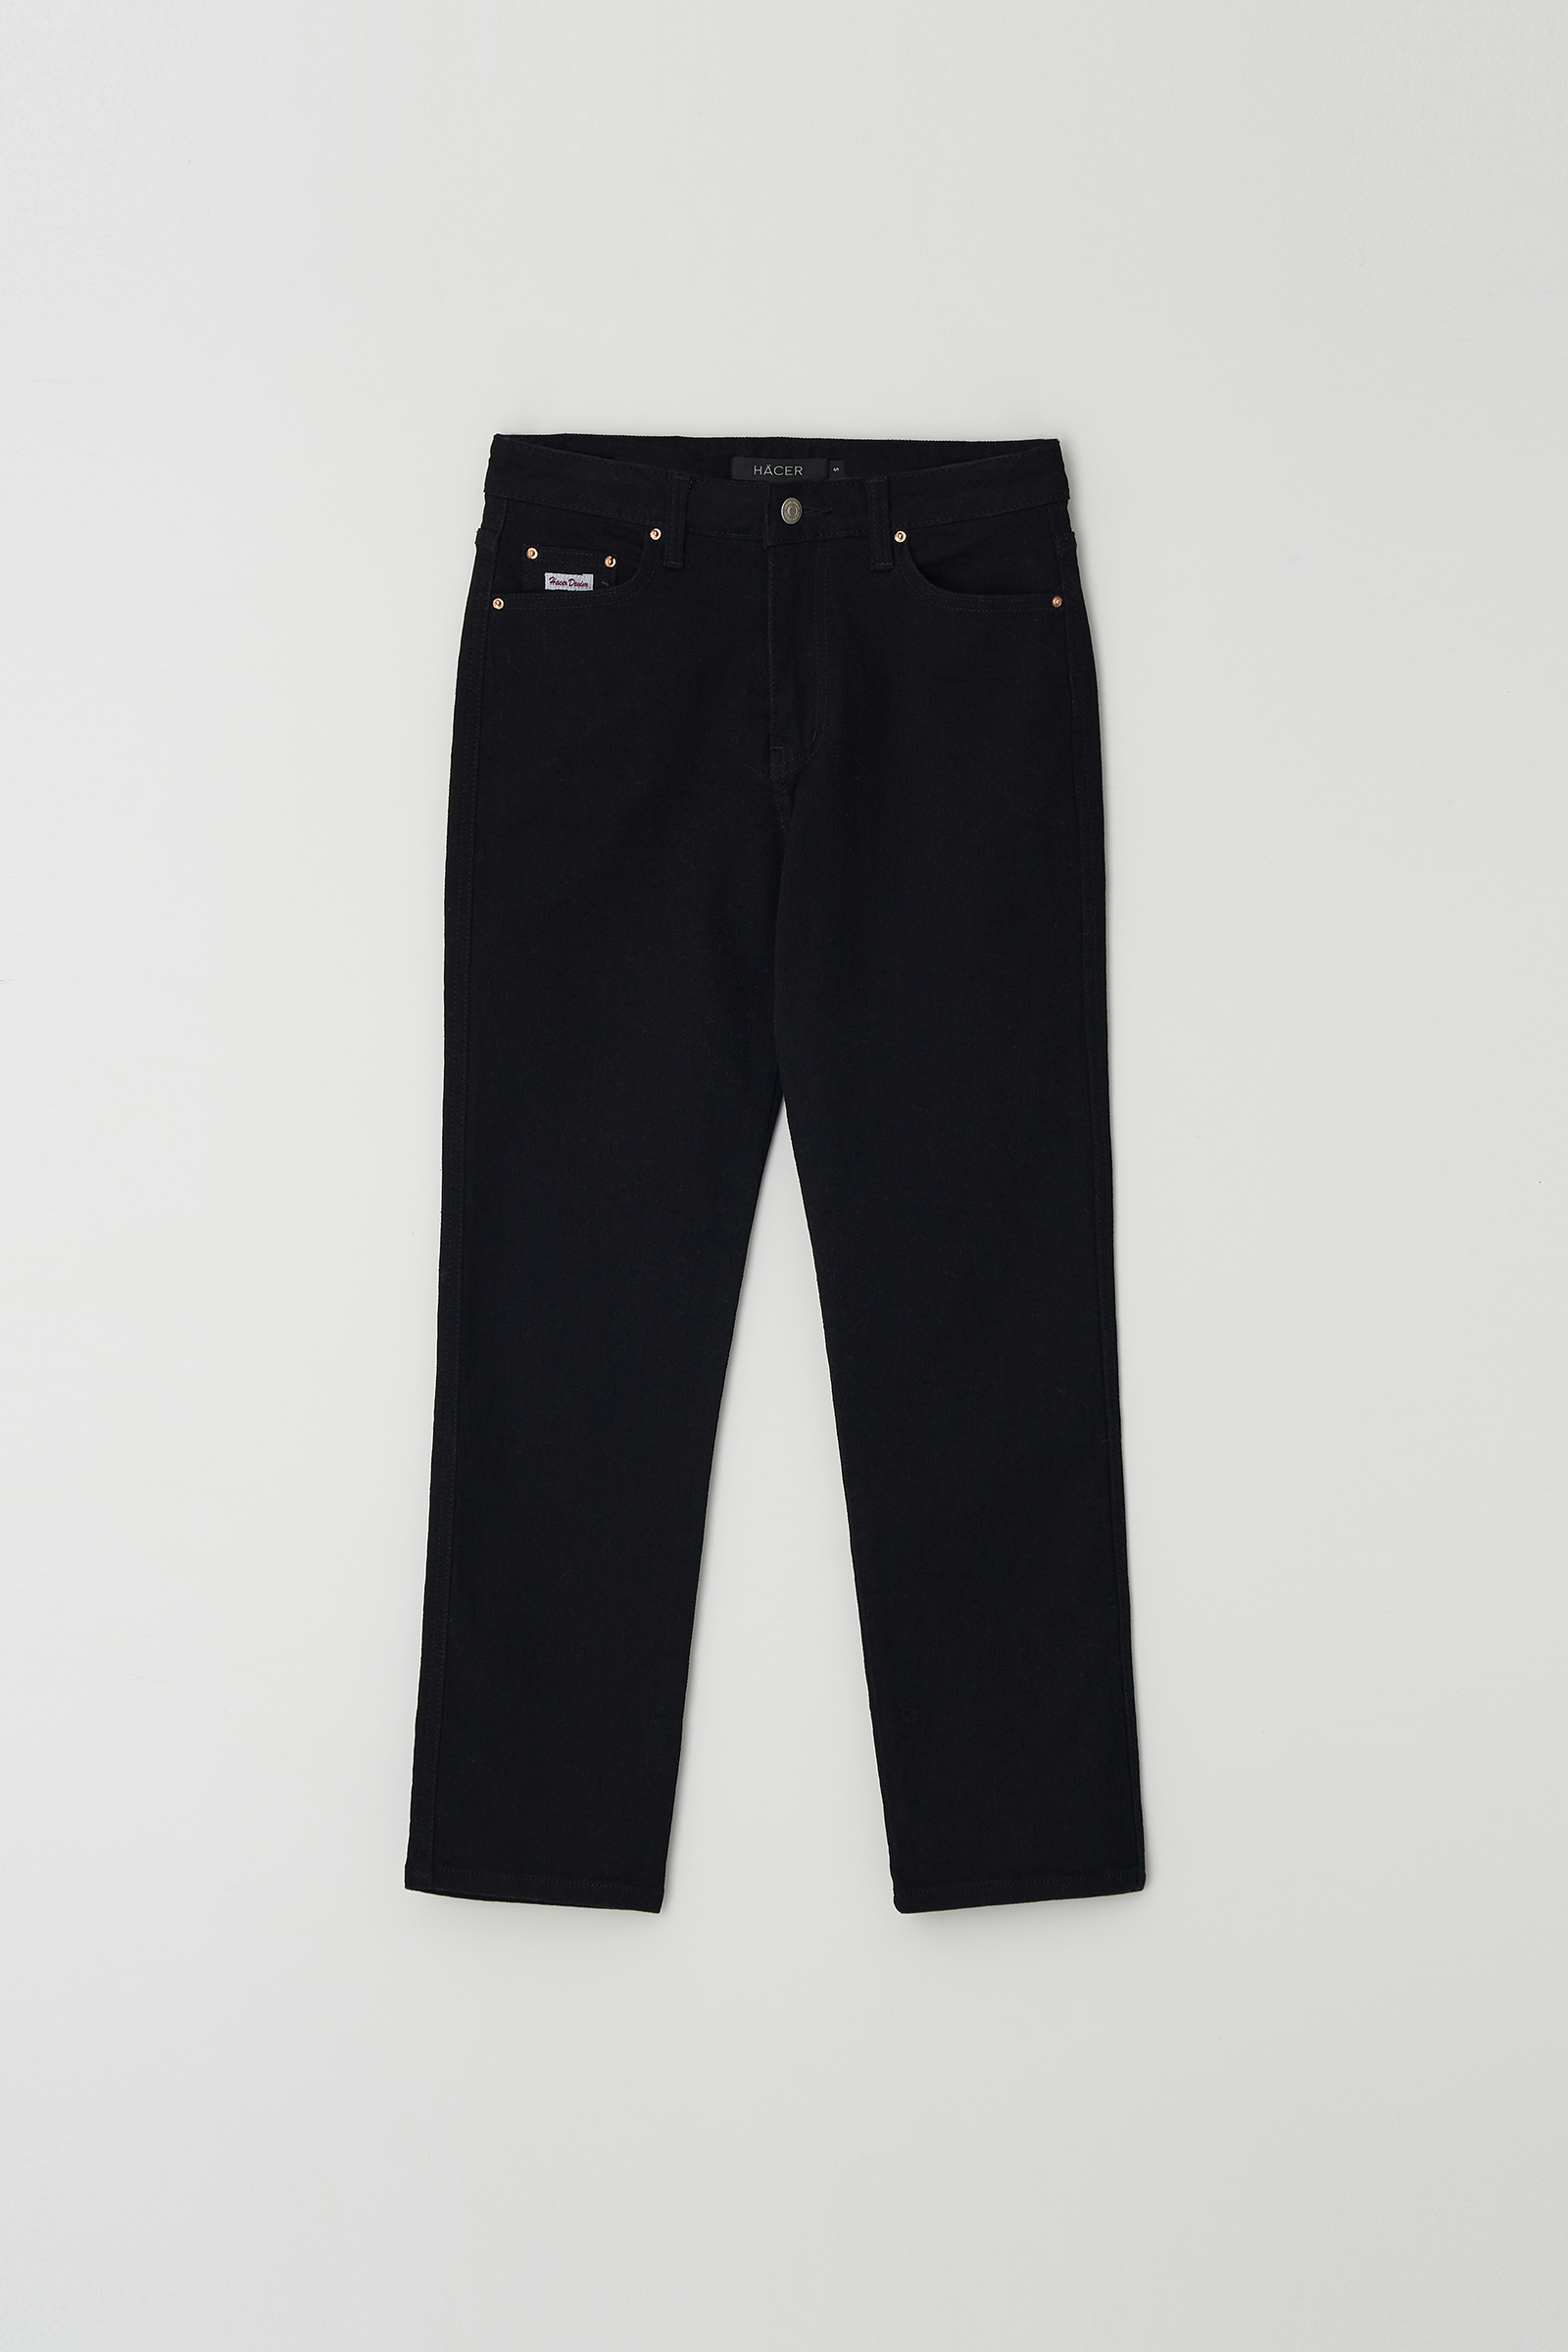 [4th] Black Cropped Jeans